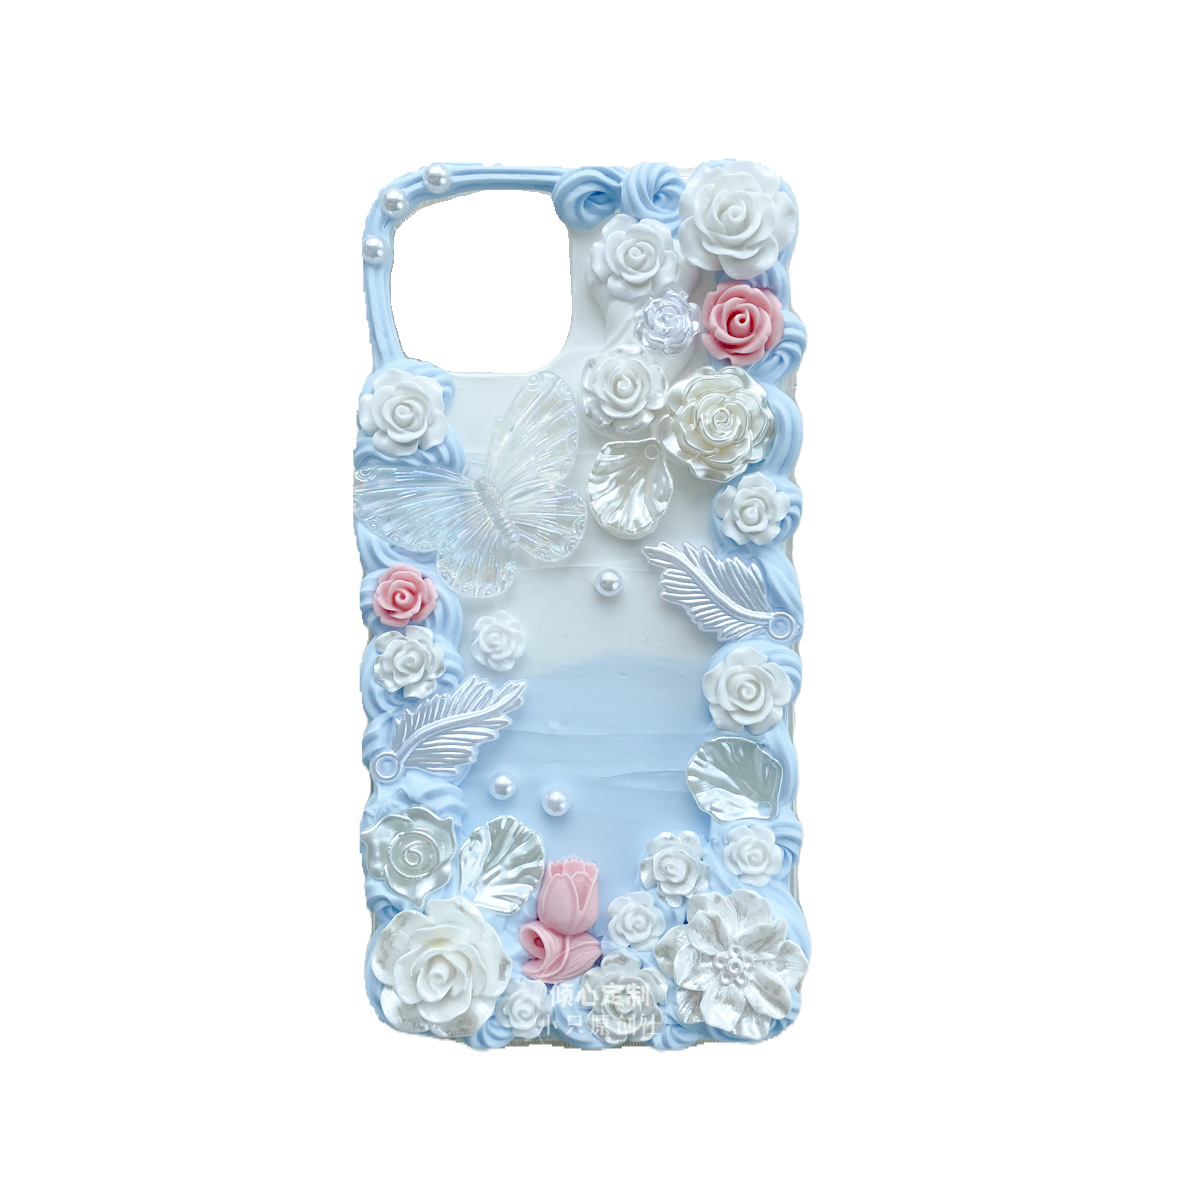 burga phone cases Diy cream gel mobile phone shell finished product baroque fairy